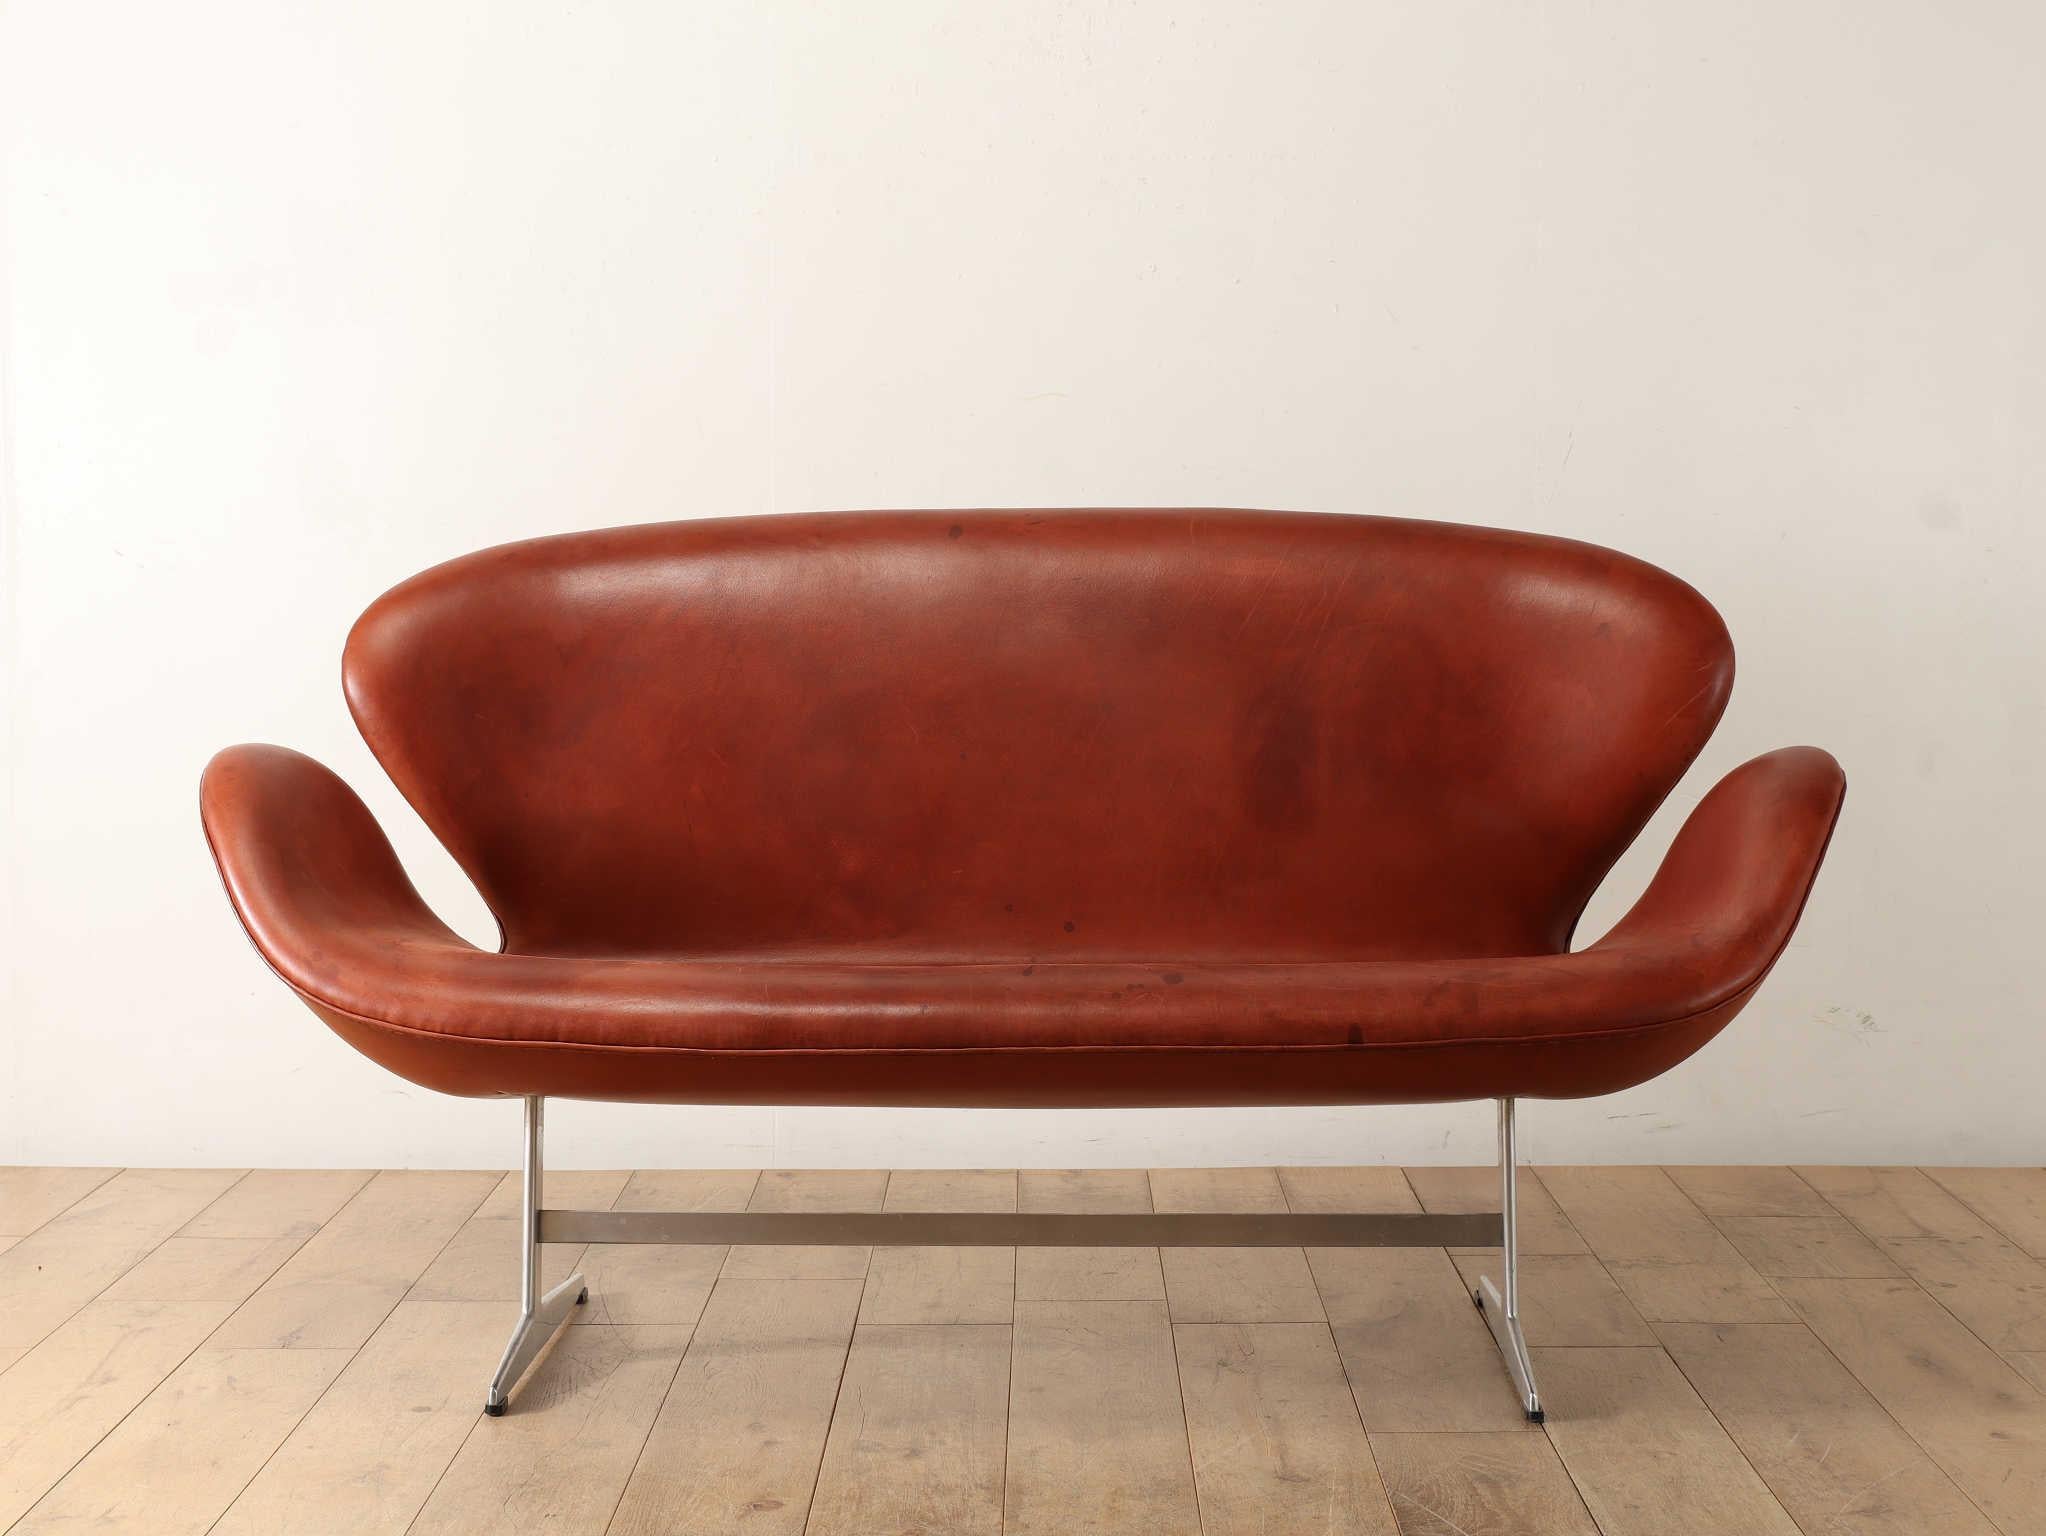 Model FH3321 Swan sofa by Fritz Hansen, designed by Arne Jacobsen for the SAS Royal Hotel in Copenhagen in 1958.
The innovative design and form, consisting only of lines, gives an organic and soft impression. The Swan sofa, with its left and right